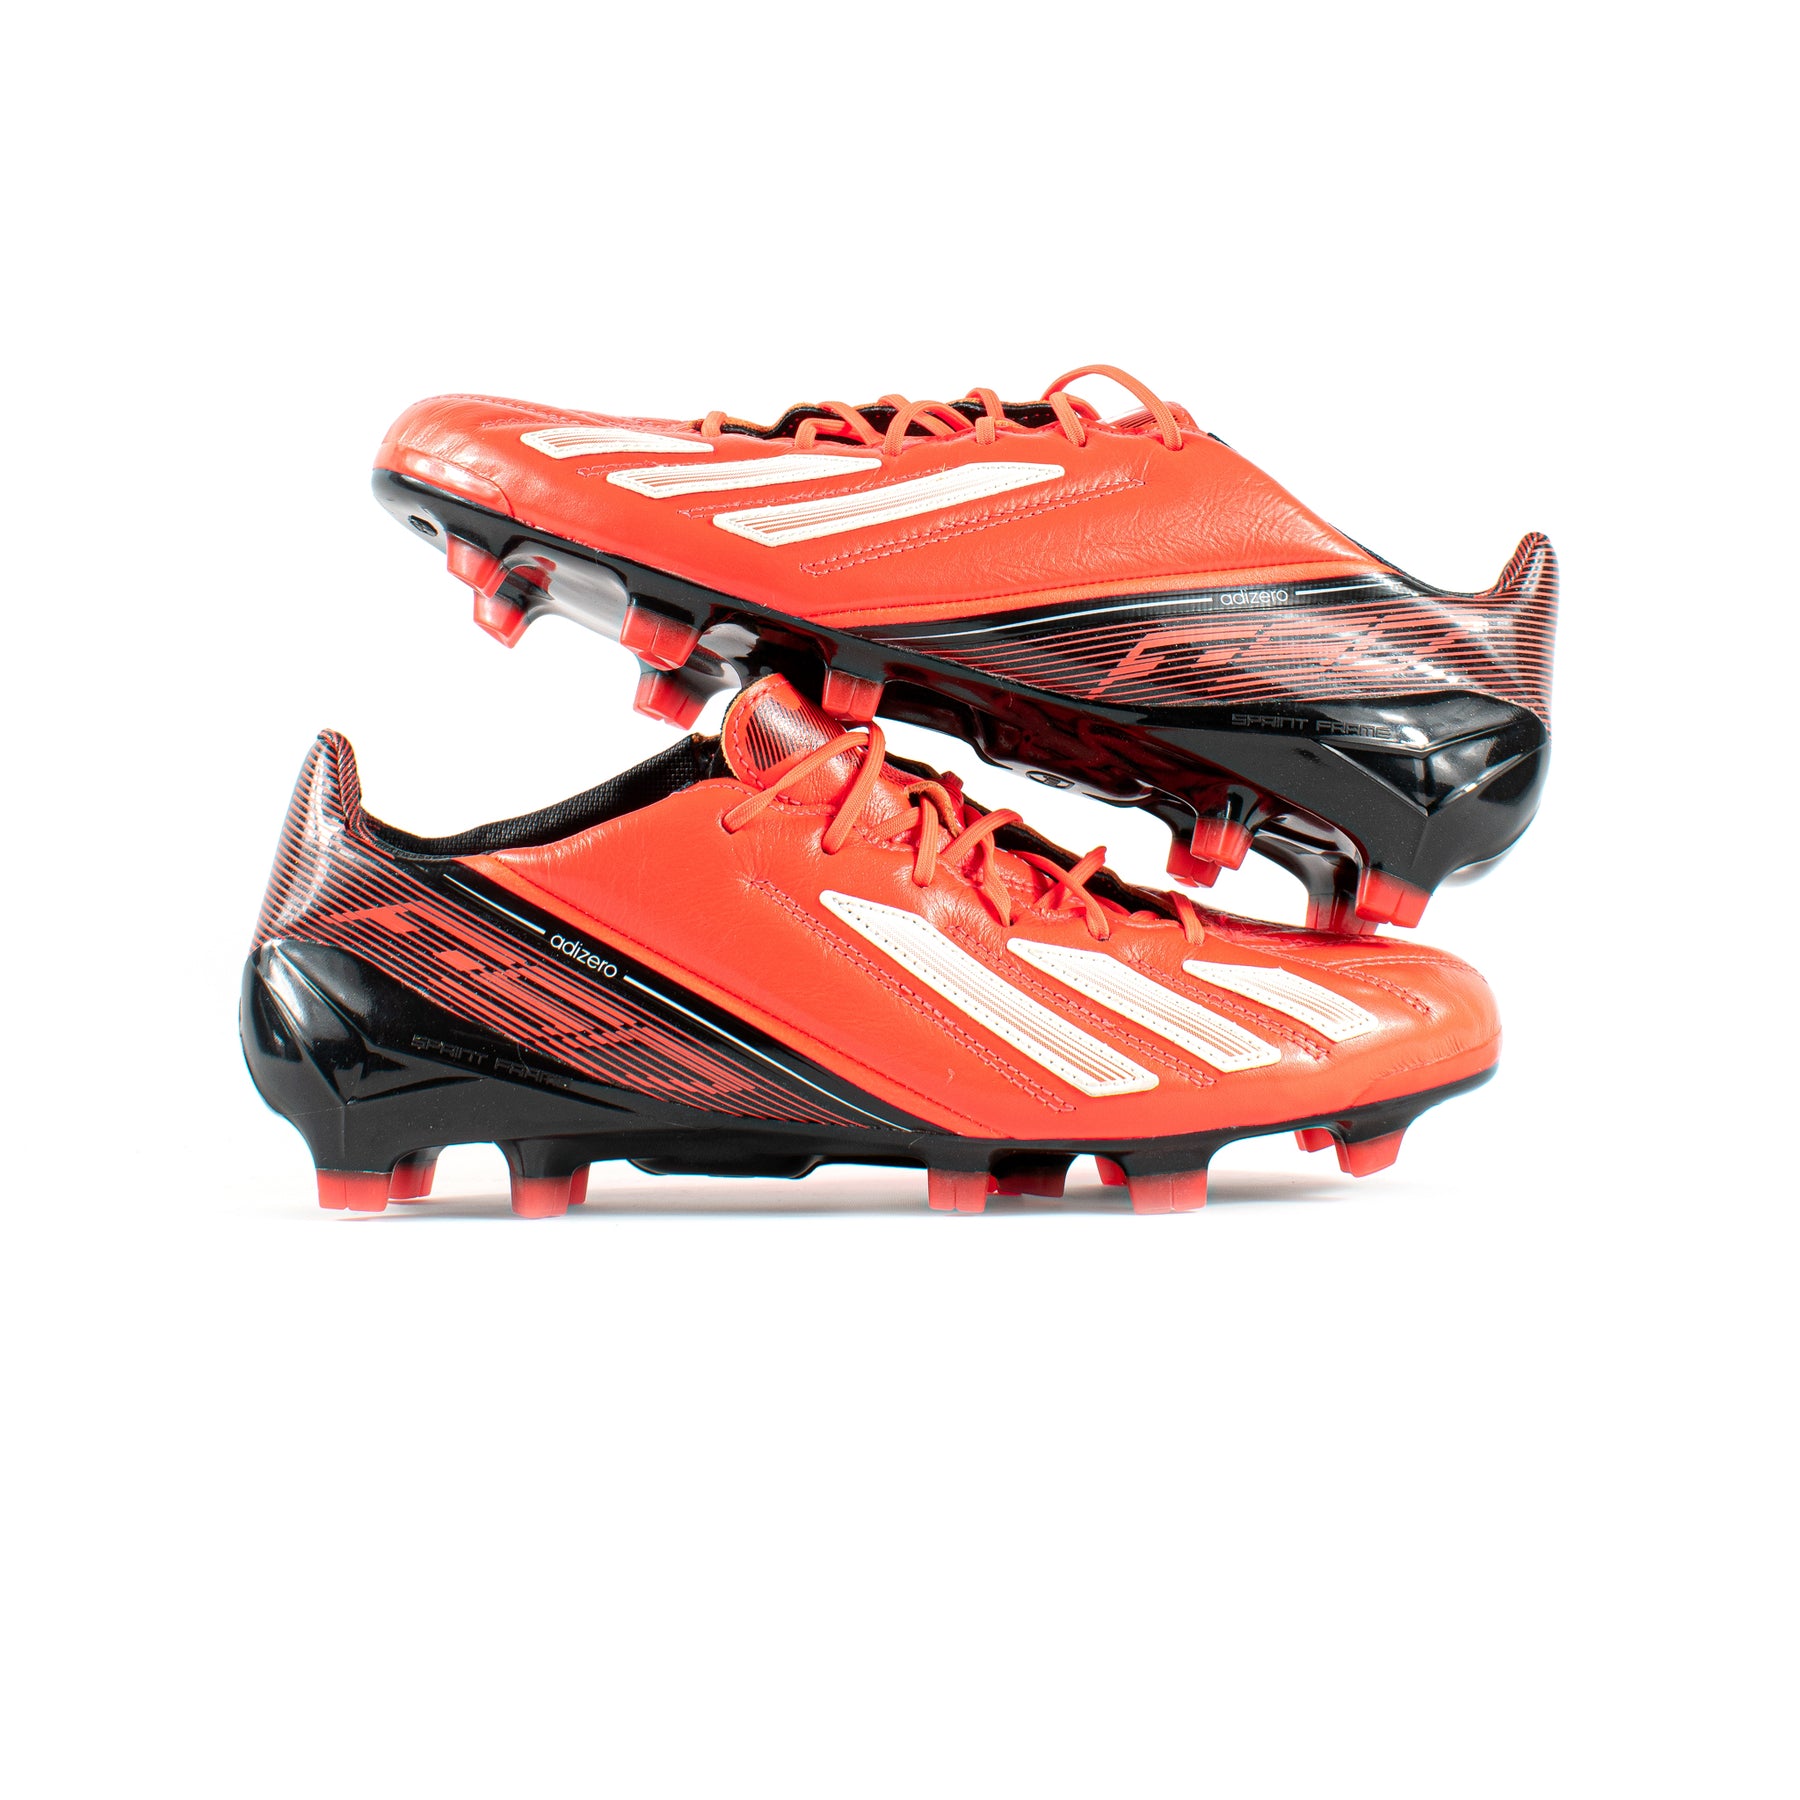 enorm rygte Når som helst Adidas F50 Adizero Leather Infrared FG – Classic Soccer Cleats